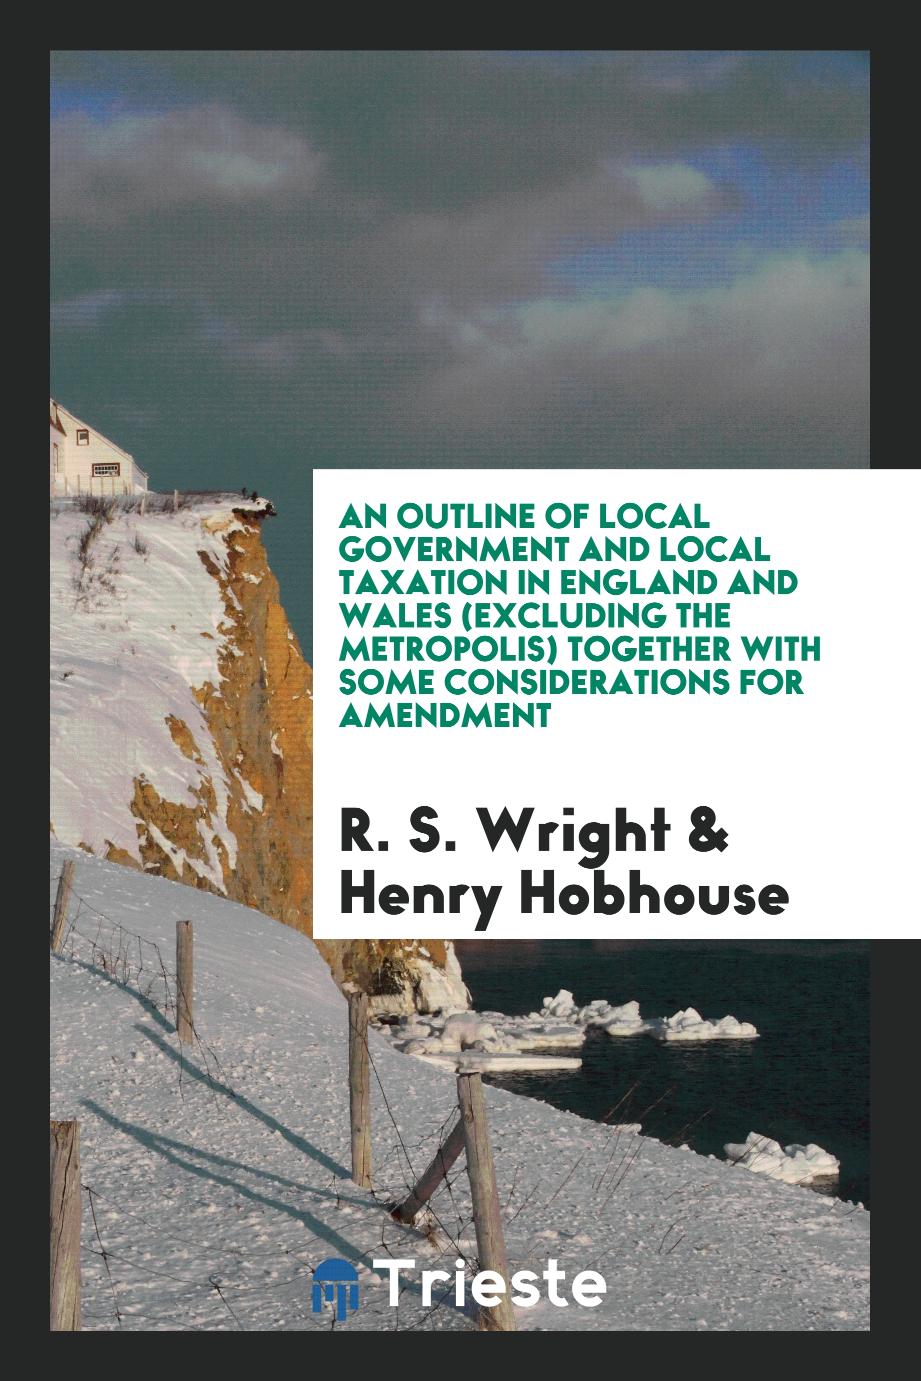 An Outline of Local Government and Local Taxation in England and Wales (Excluding the Metropolis) Together with Some Considerations for Amendment